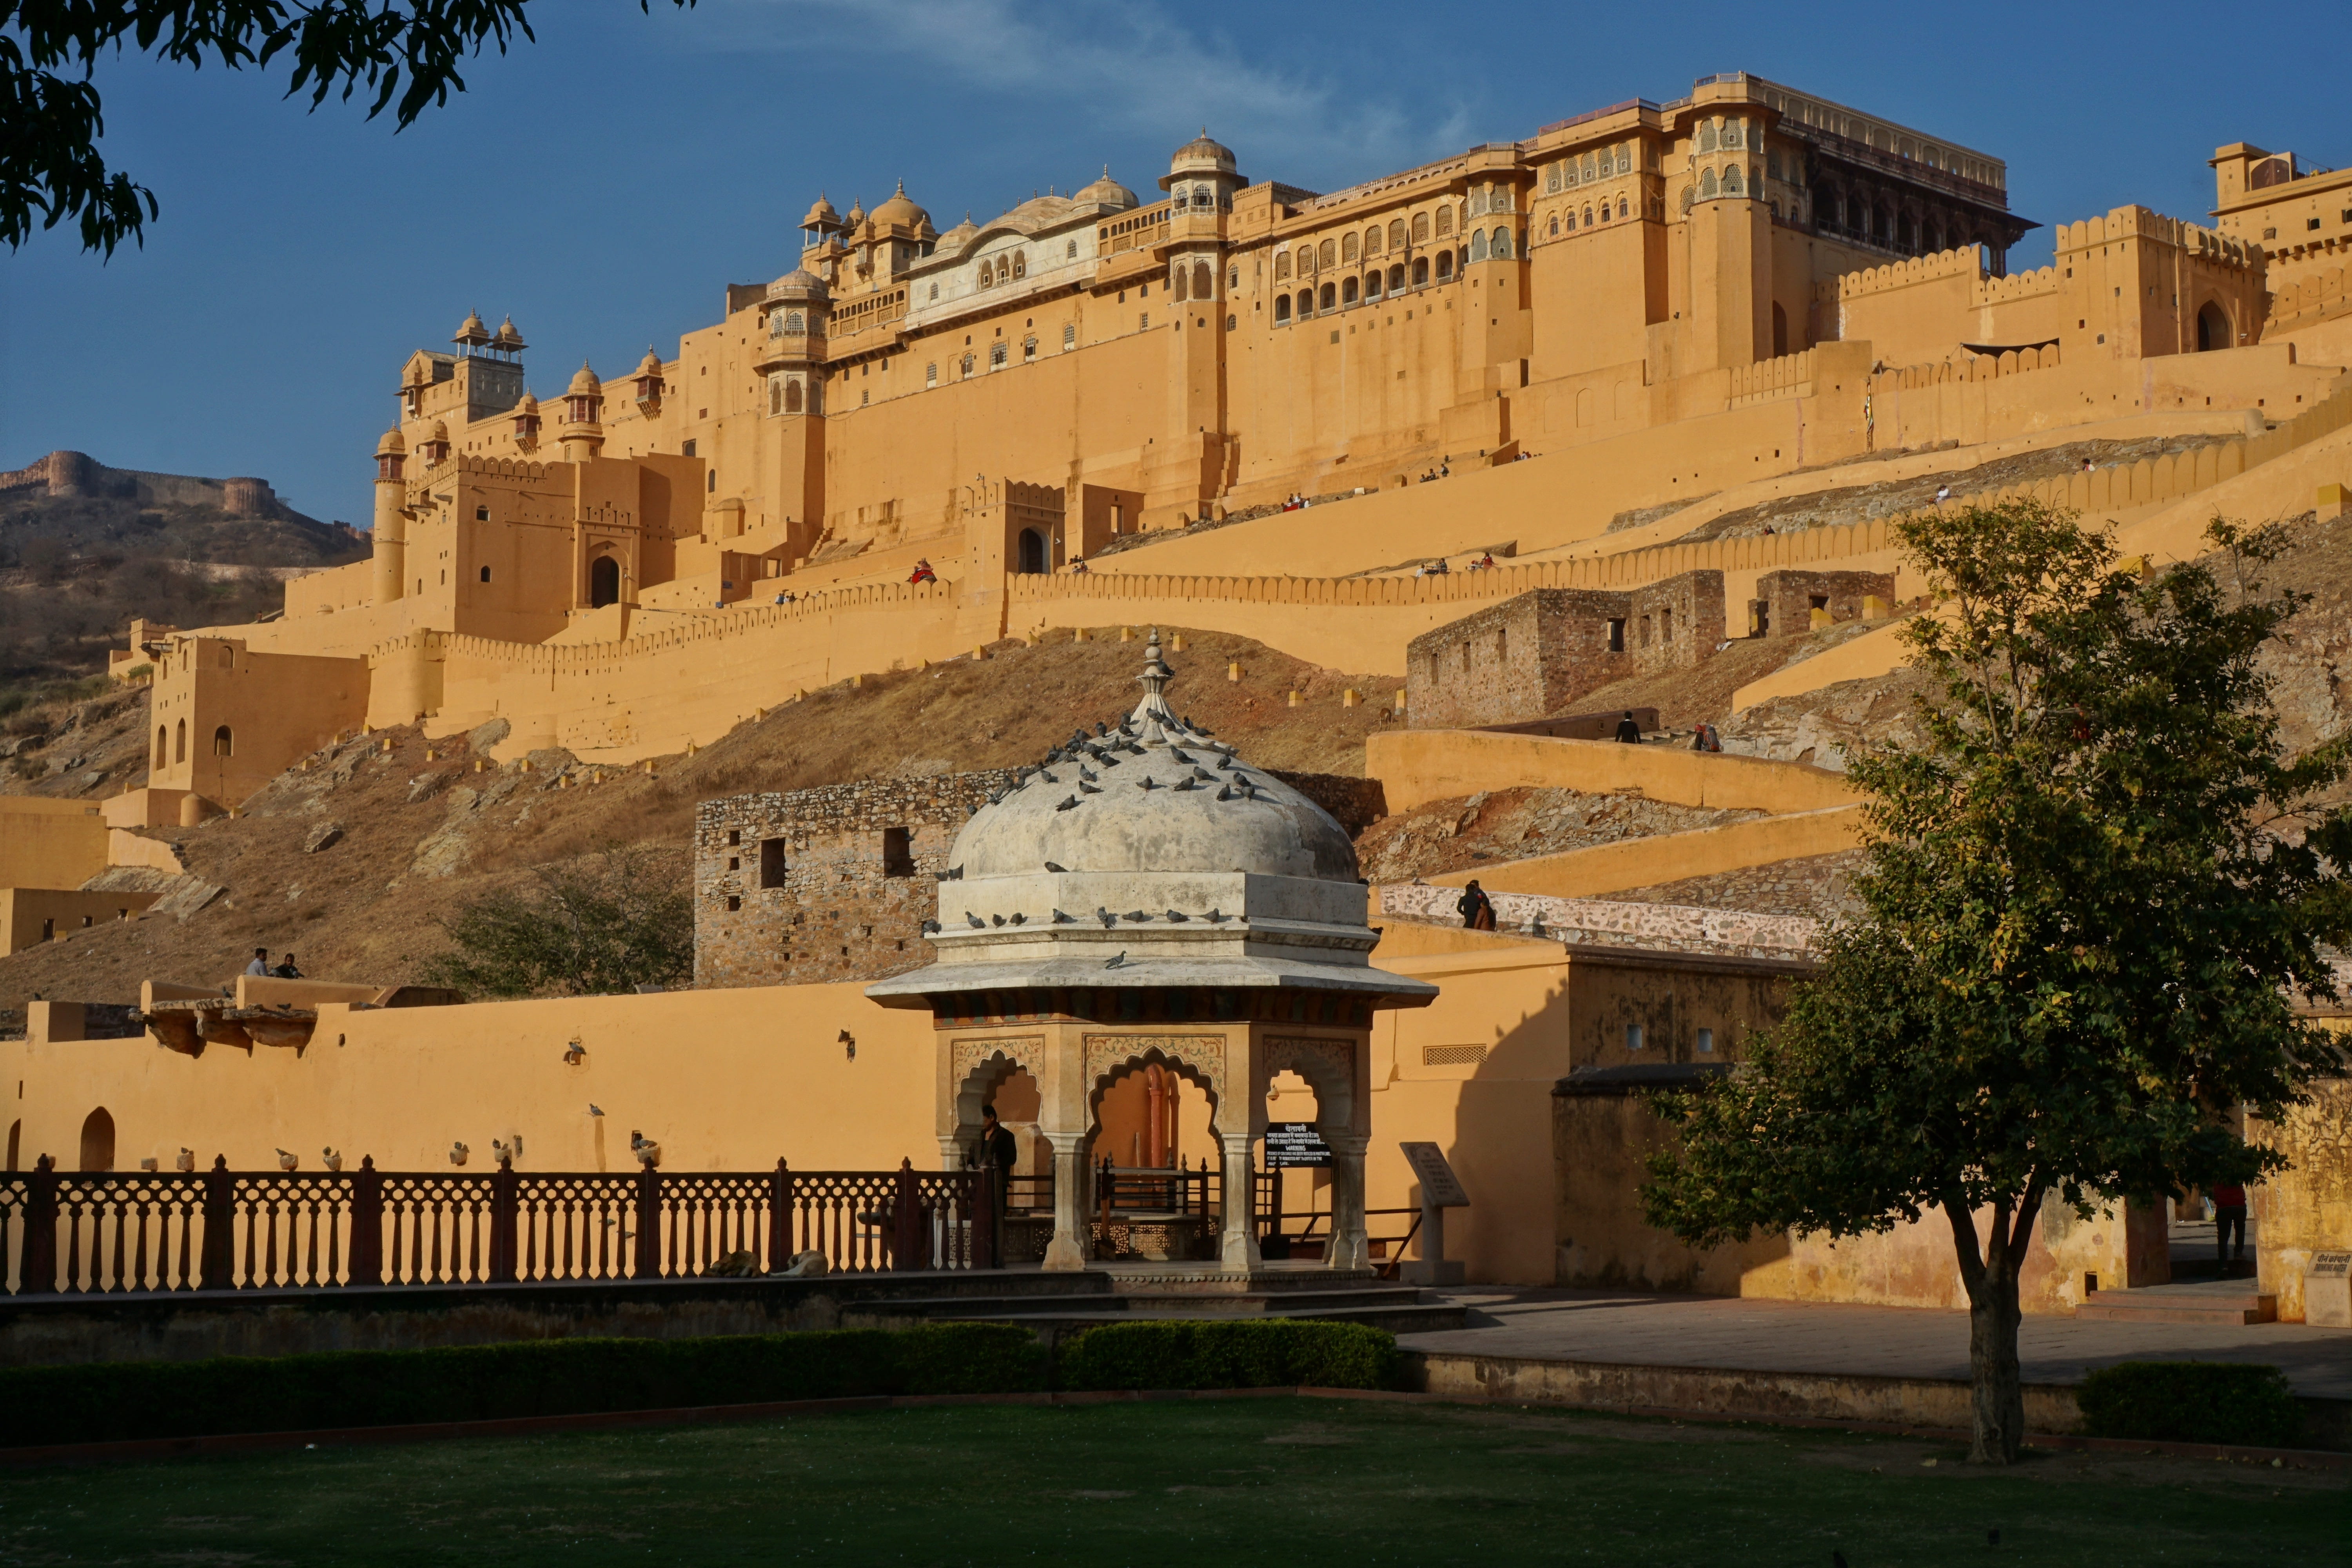 amber fort, jaipur, india, architecture, travel, building, city